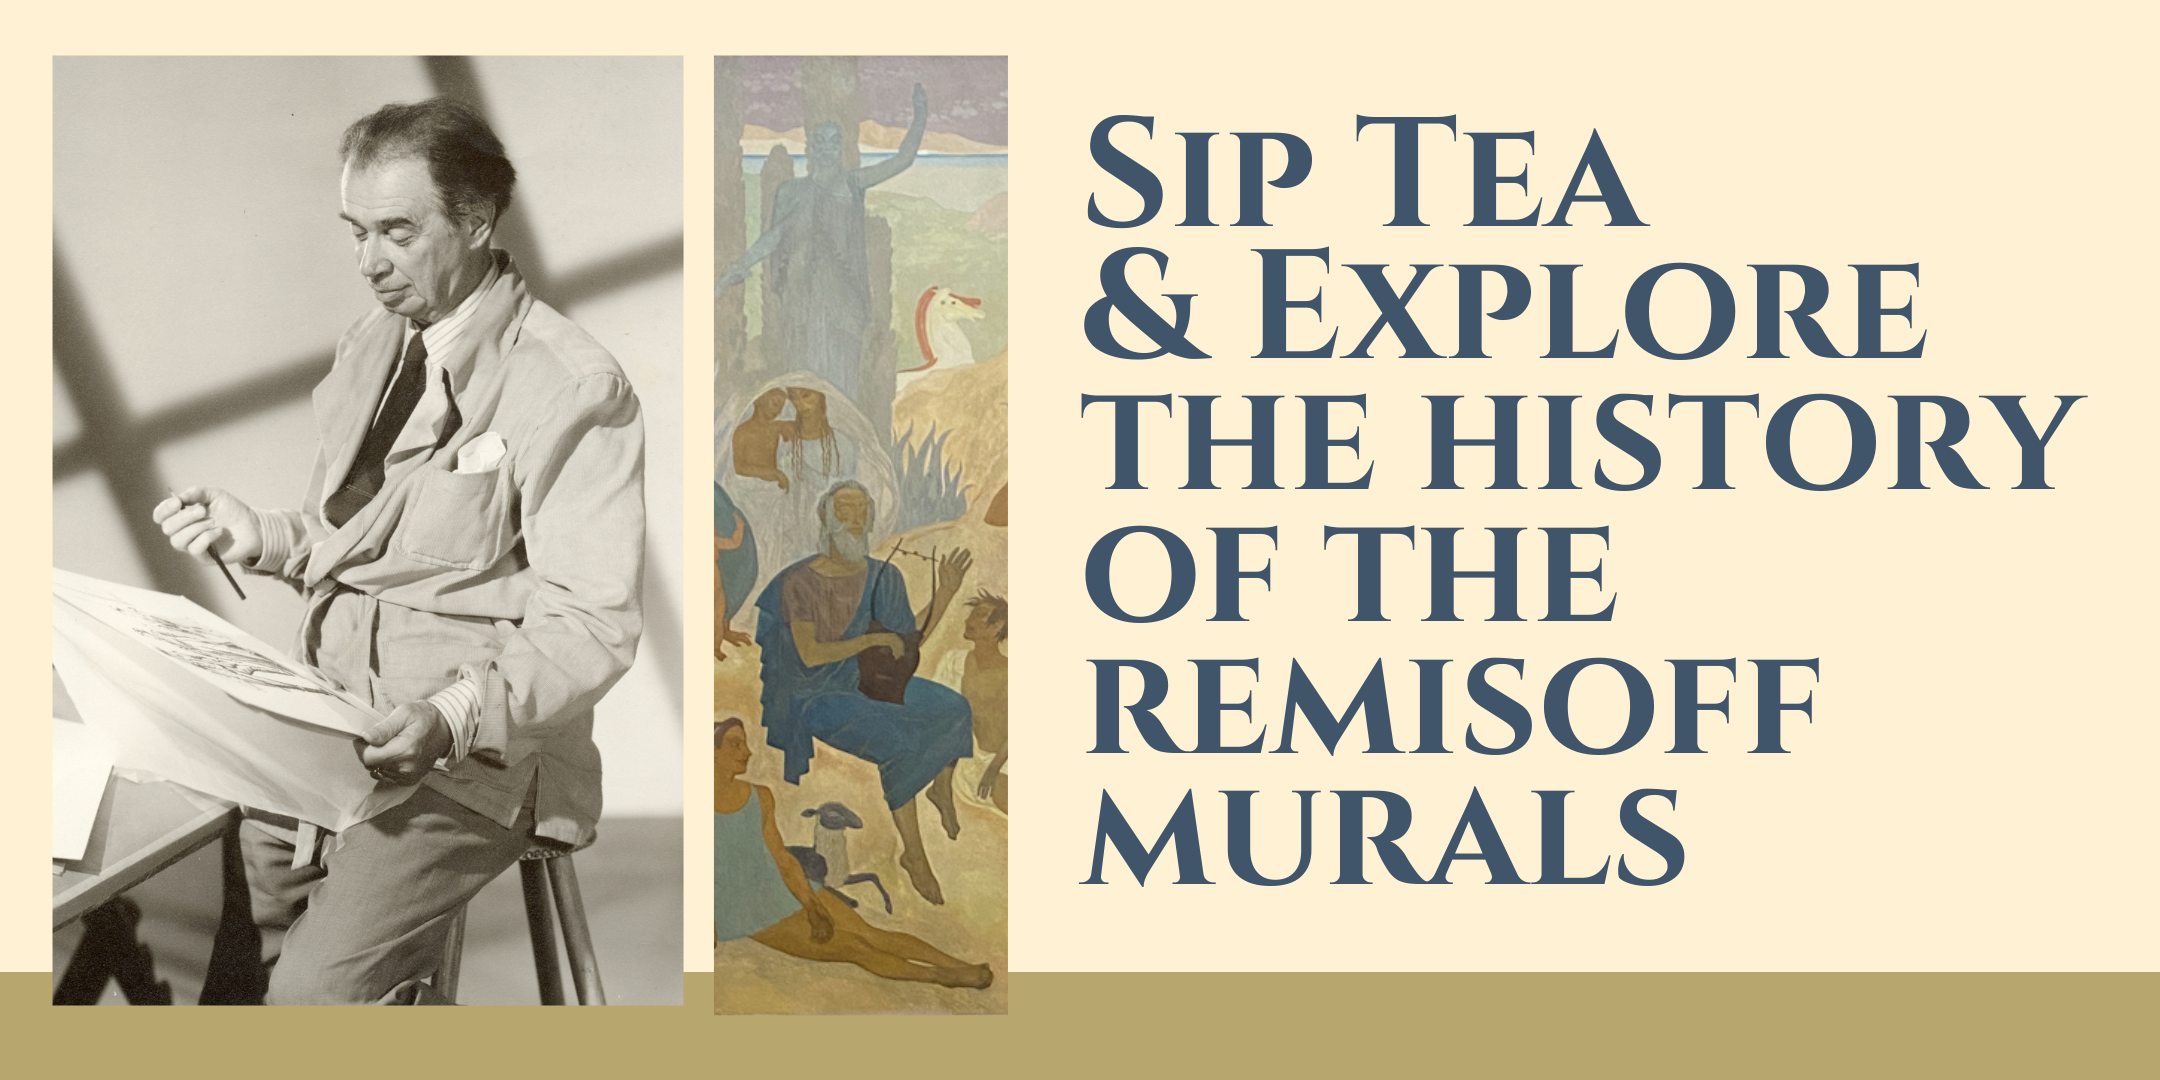 image of "Sip Tea & Explore the History of the Remisoff Murals"